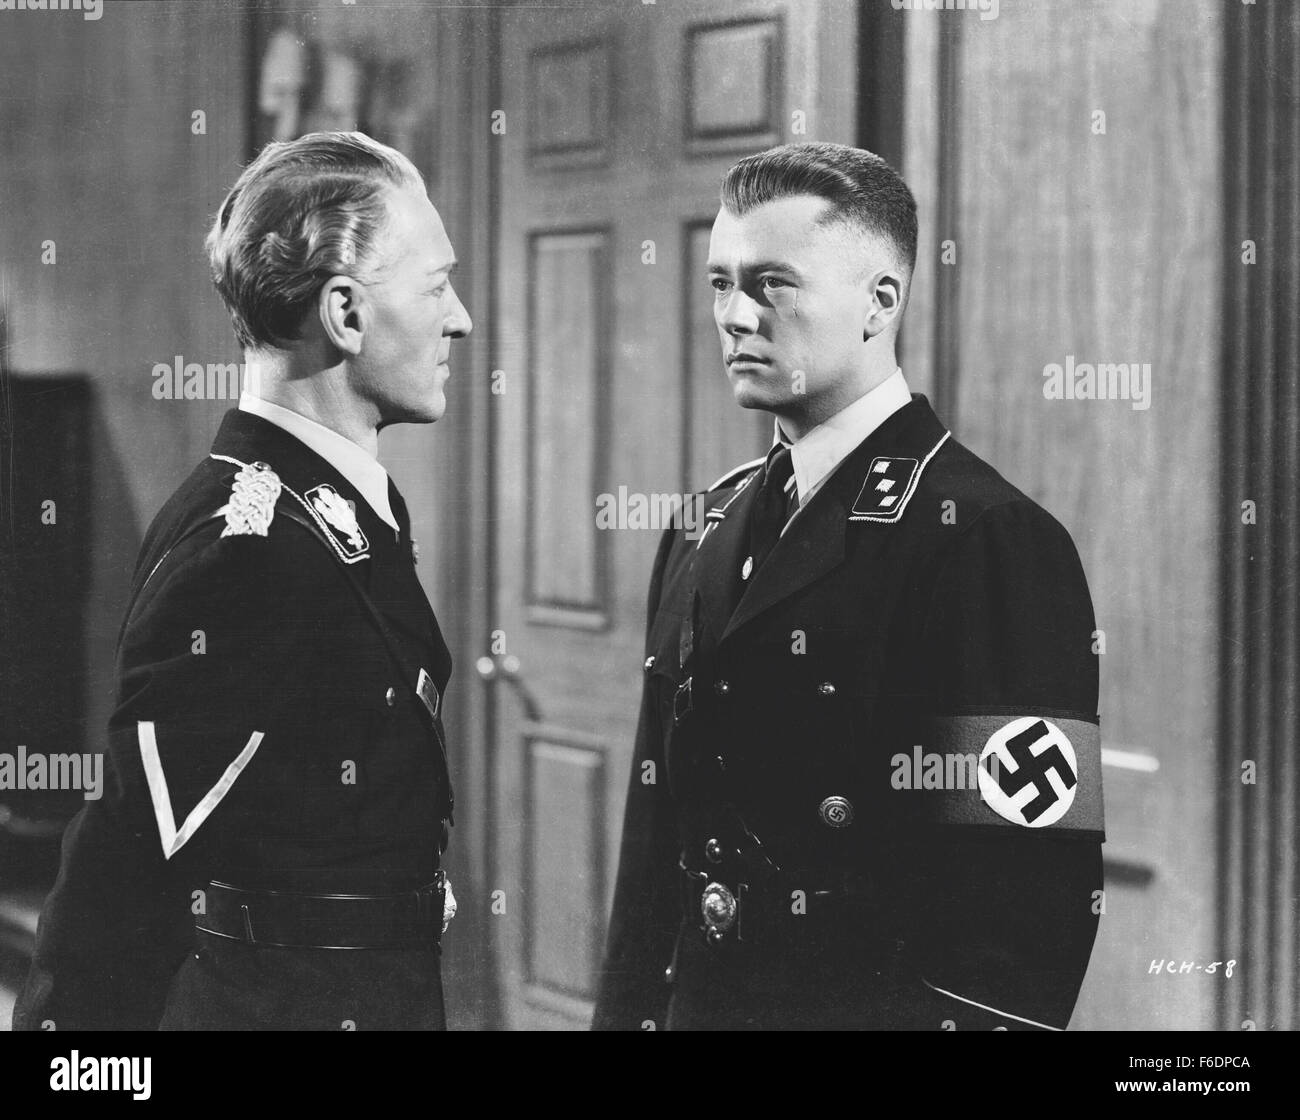 RELEASE DATE: January 6, 1943. MOVIE TITLE: Hitler's Children. STUDIO: RKO Radio Pictures. PLOT: This propaganda piece starts in 1933. Prof. Nichols' American school in Berlin is next door to a school for the Hitler Youth. Karl, from the latter, is attracted to German-American Anna, but events lead to their separation. Later, at the outbreak of war in Europe, Anna is removed from Nichols' school on presumption of German citizenship. Nichols becomes obsessed with finding her, as Anna undergoes a rather lurid odyssey through the Nazi nightmare. PICTURED: . Stock Photo